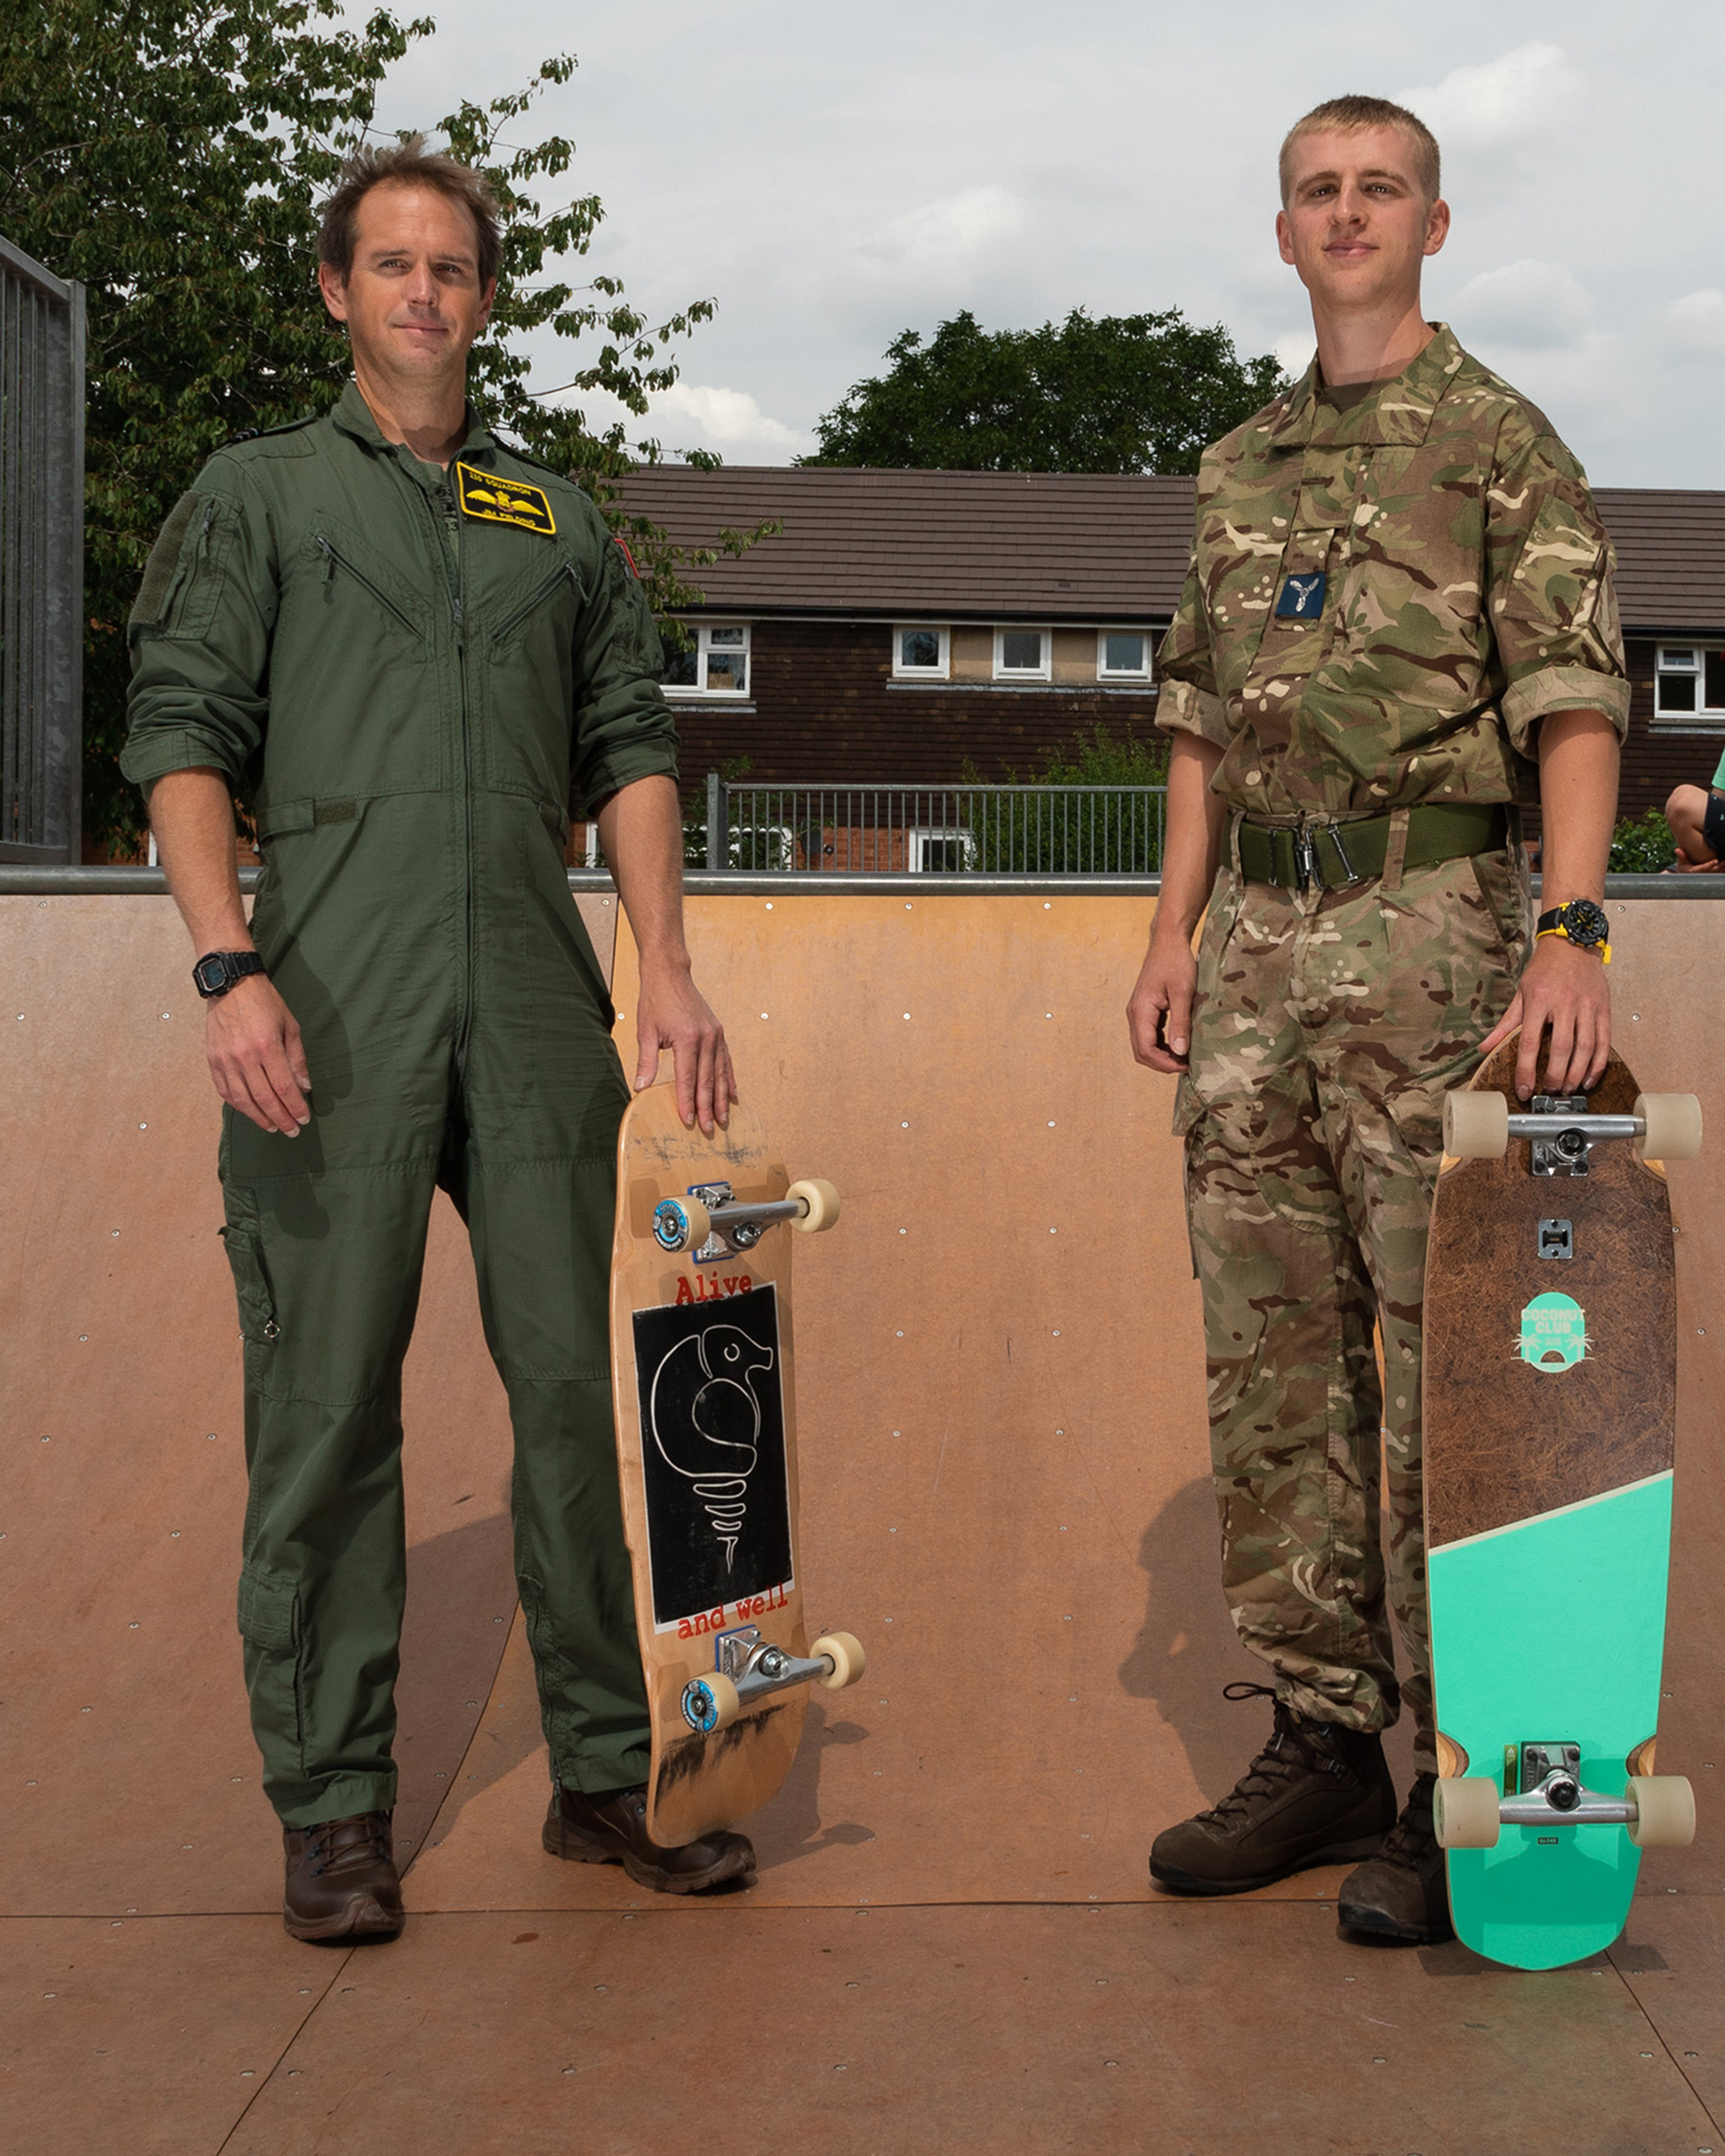 Image shows aviators in a skate park, standing with skate boards.